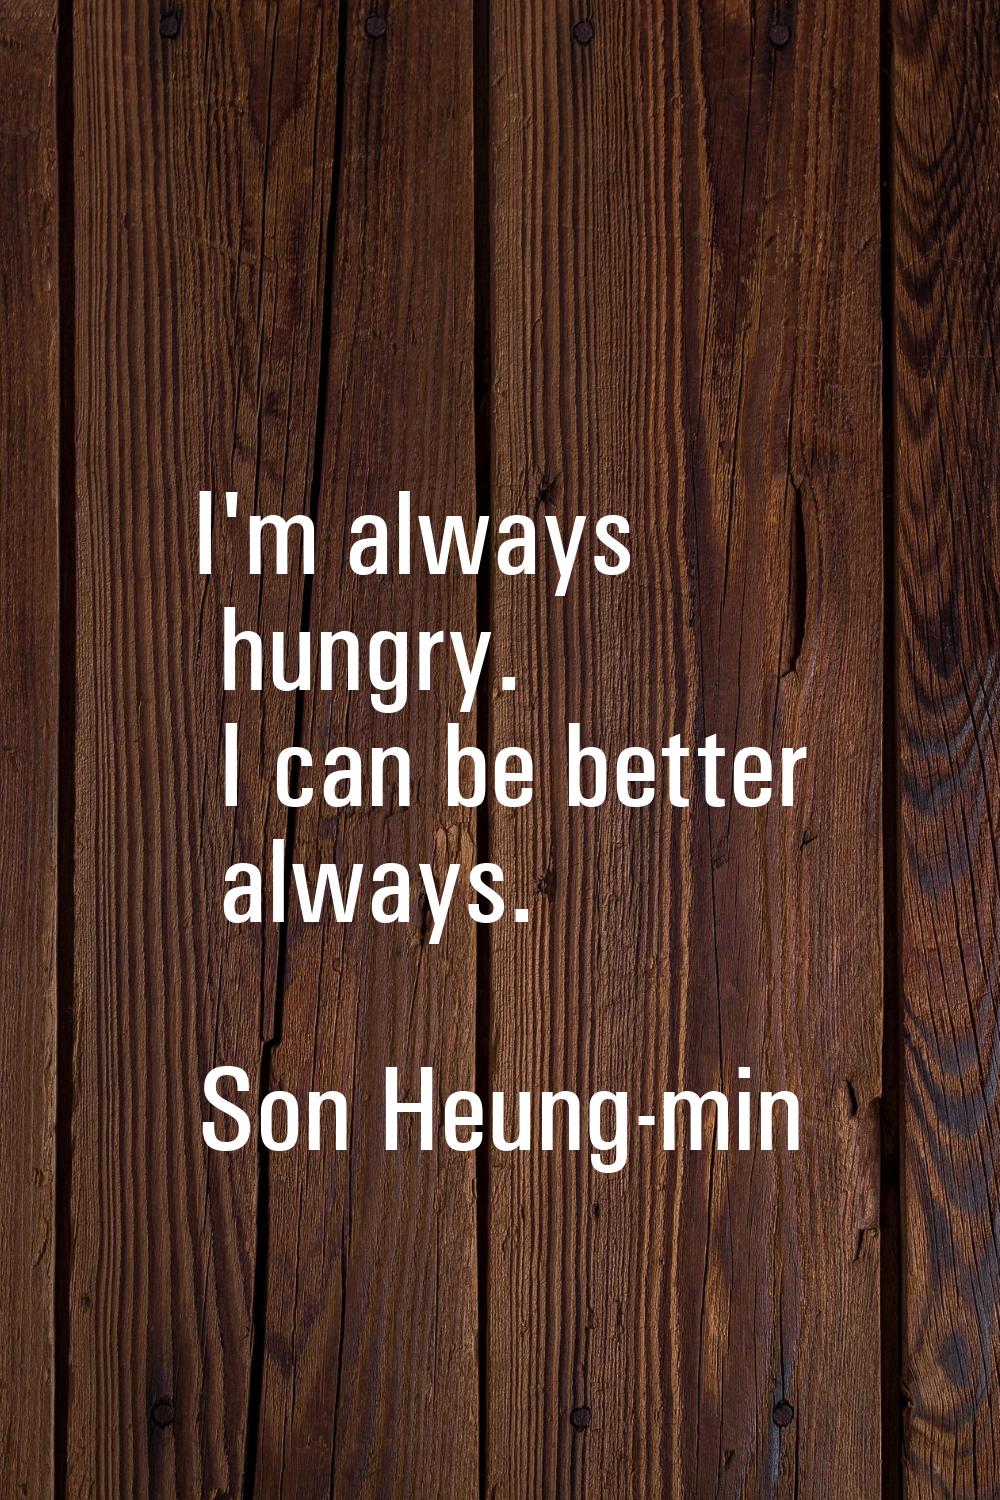 I'm always hungry. I can be better always.